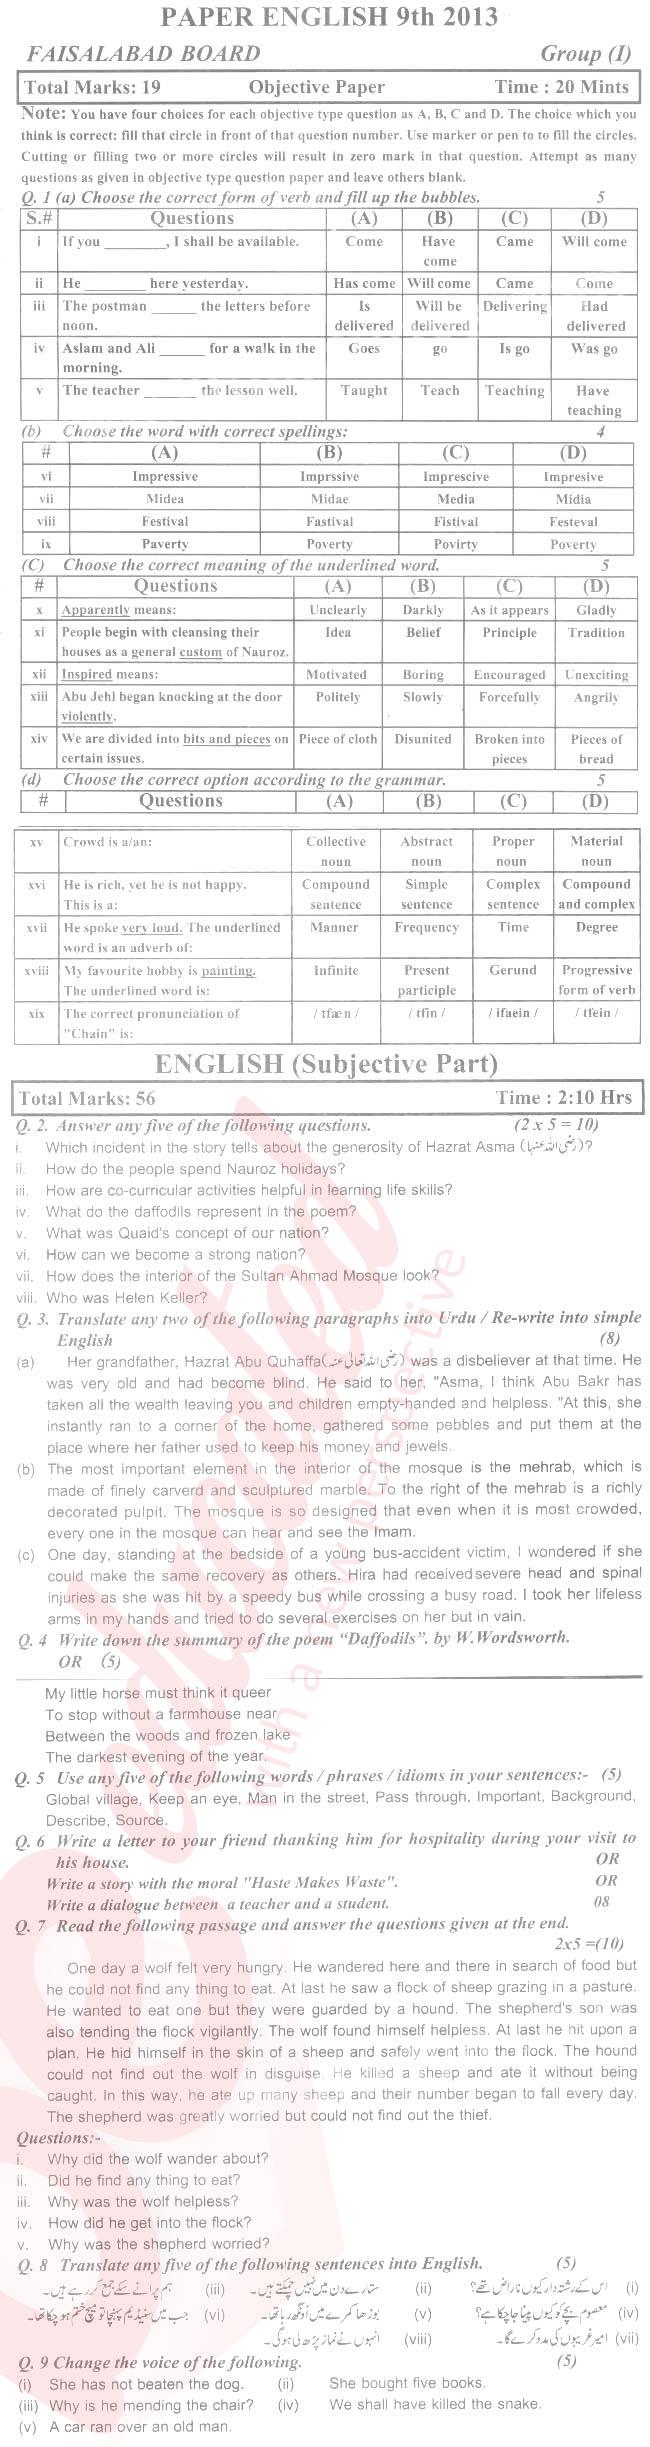 English 9th class Past Paper Group 1 BISE Faisalabad 2013